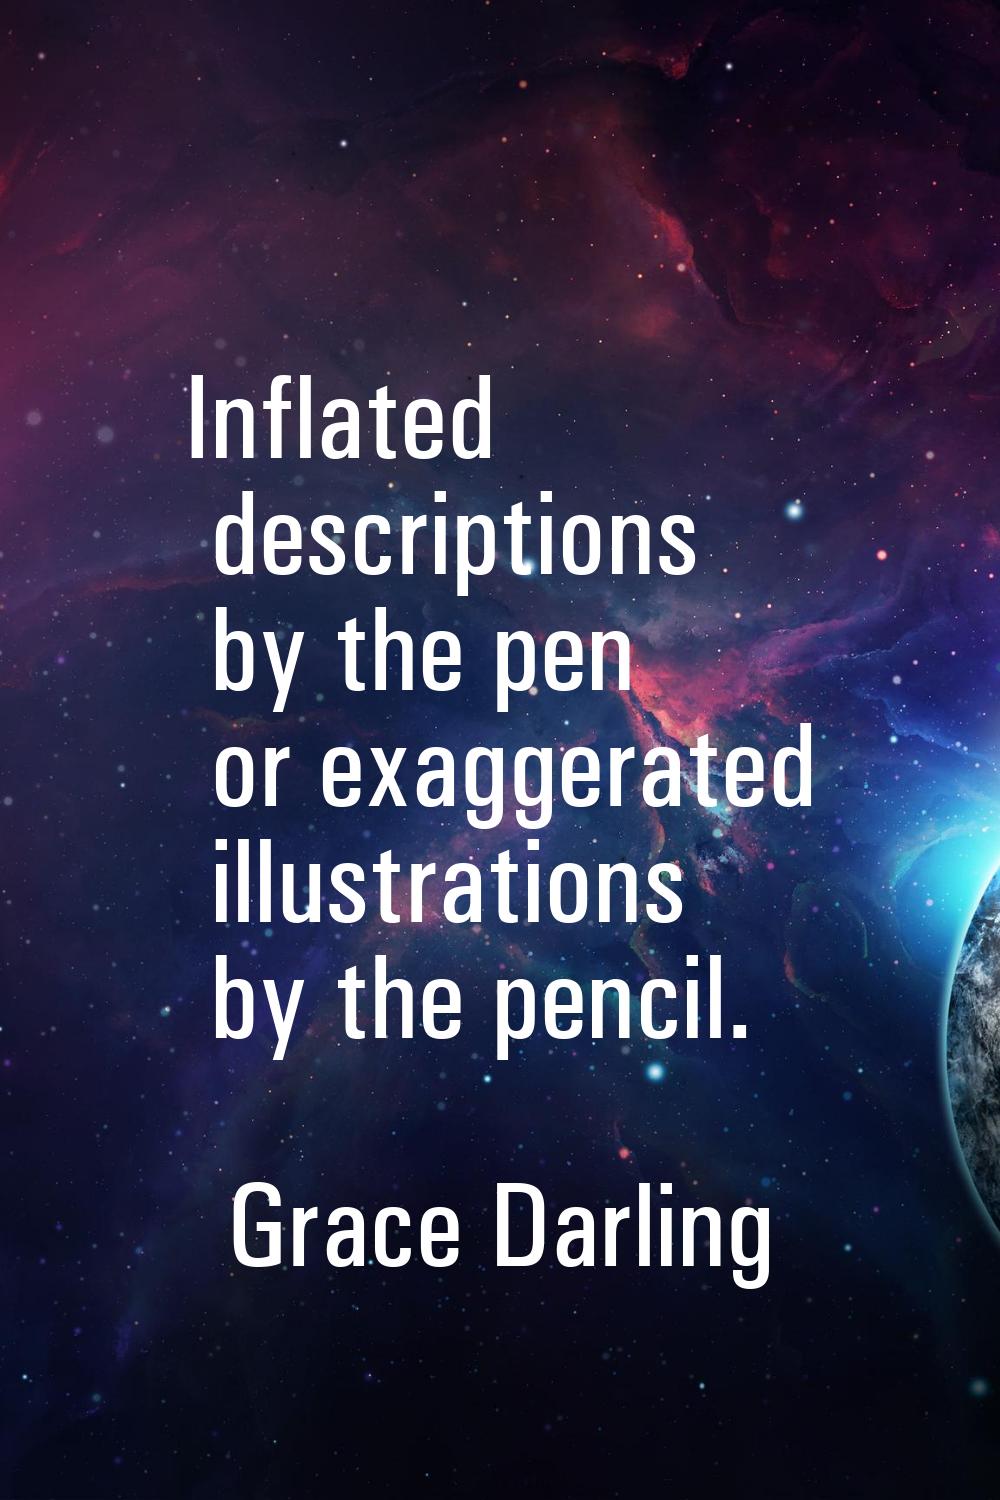 Inflated descriptions by the pen or exaggerated illustrations by the pencil.